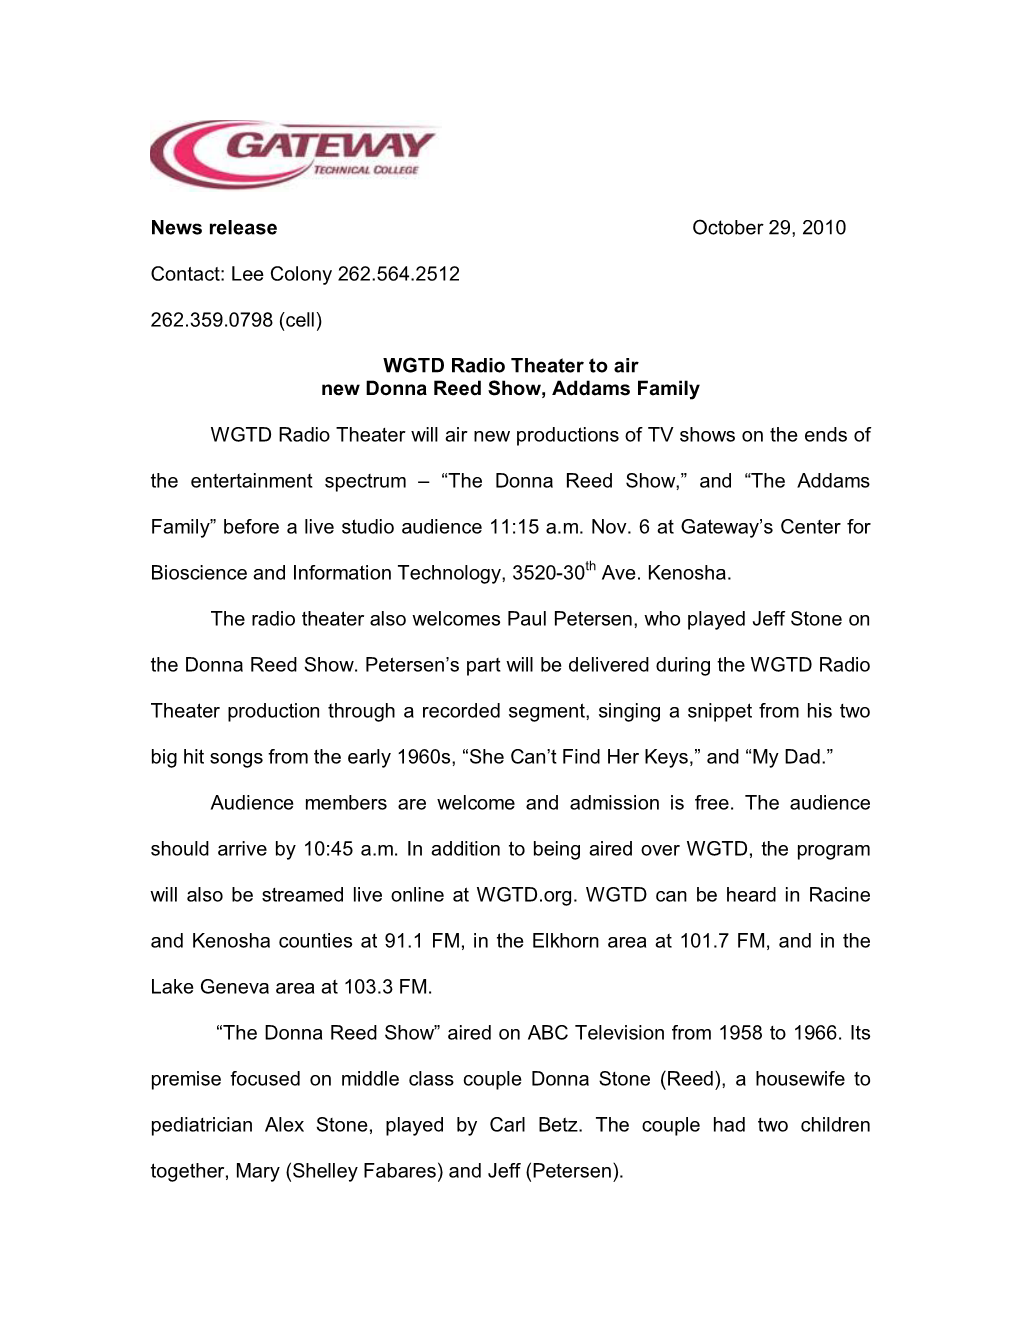 WGTD Radio Theater to Air New Donna Reed Show, Addams Family(Link Is External)